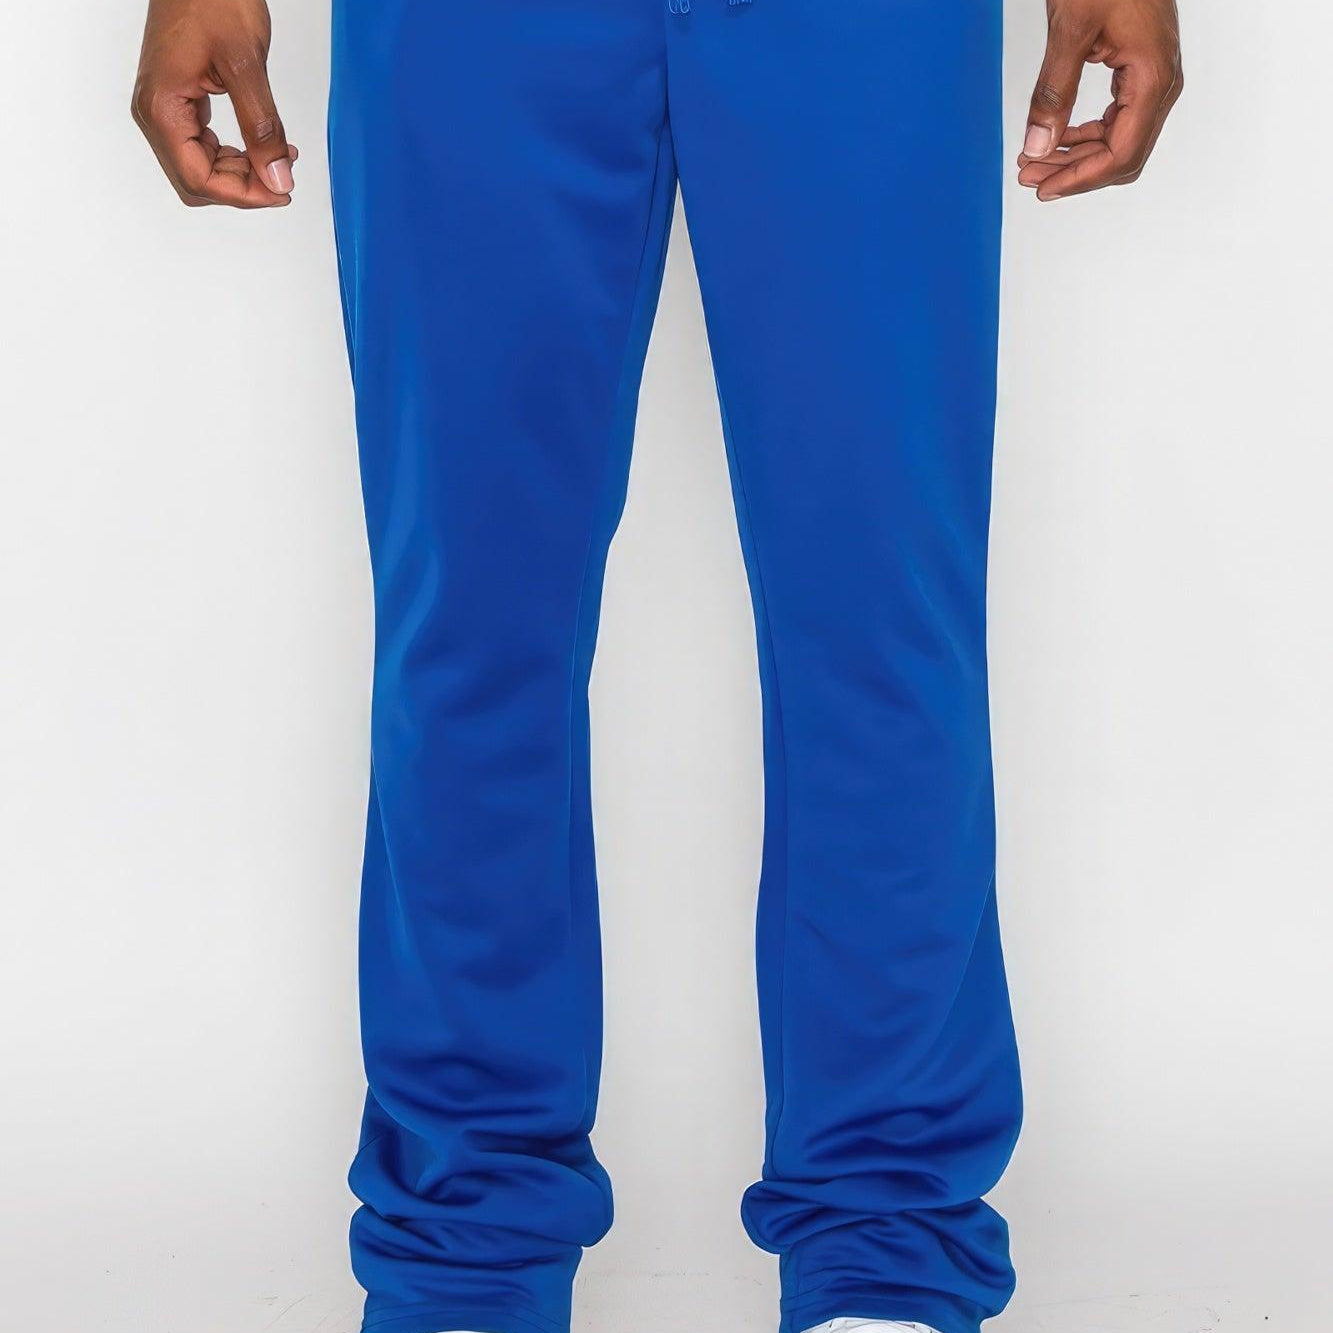 Men's Pants - Joggers Blue Solid Flare Stacked Track Pants